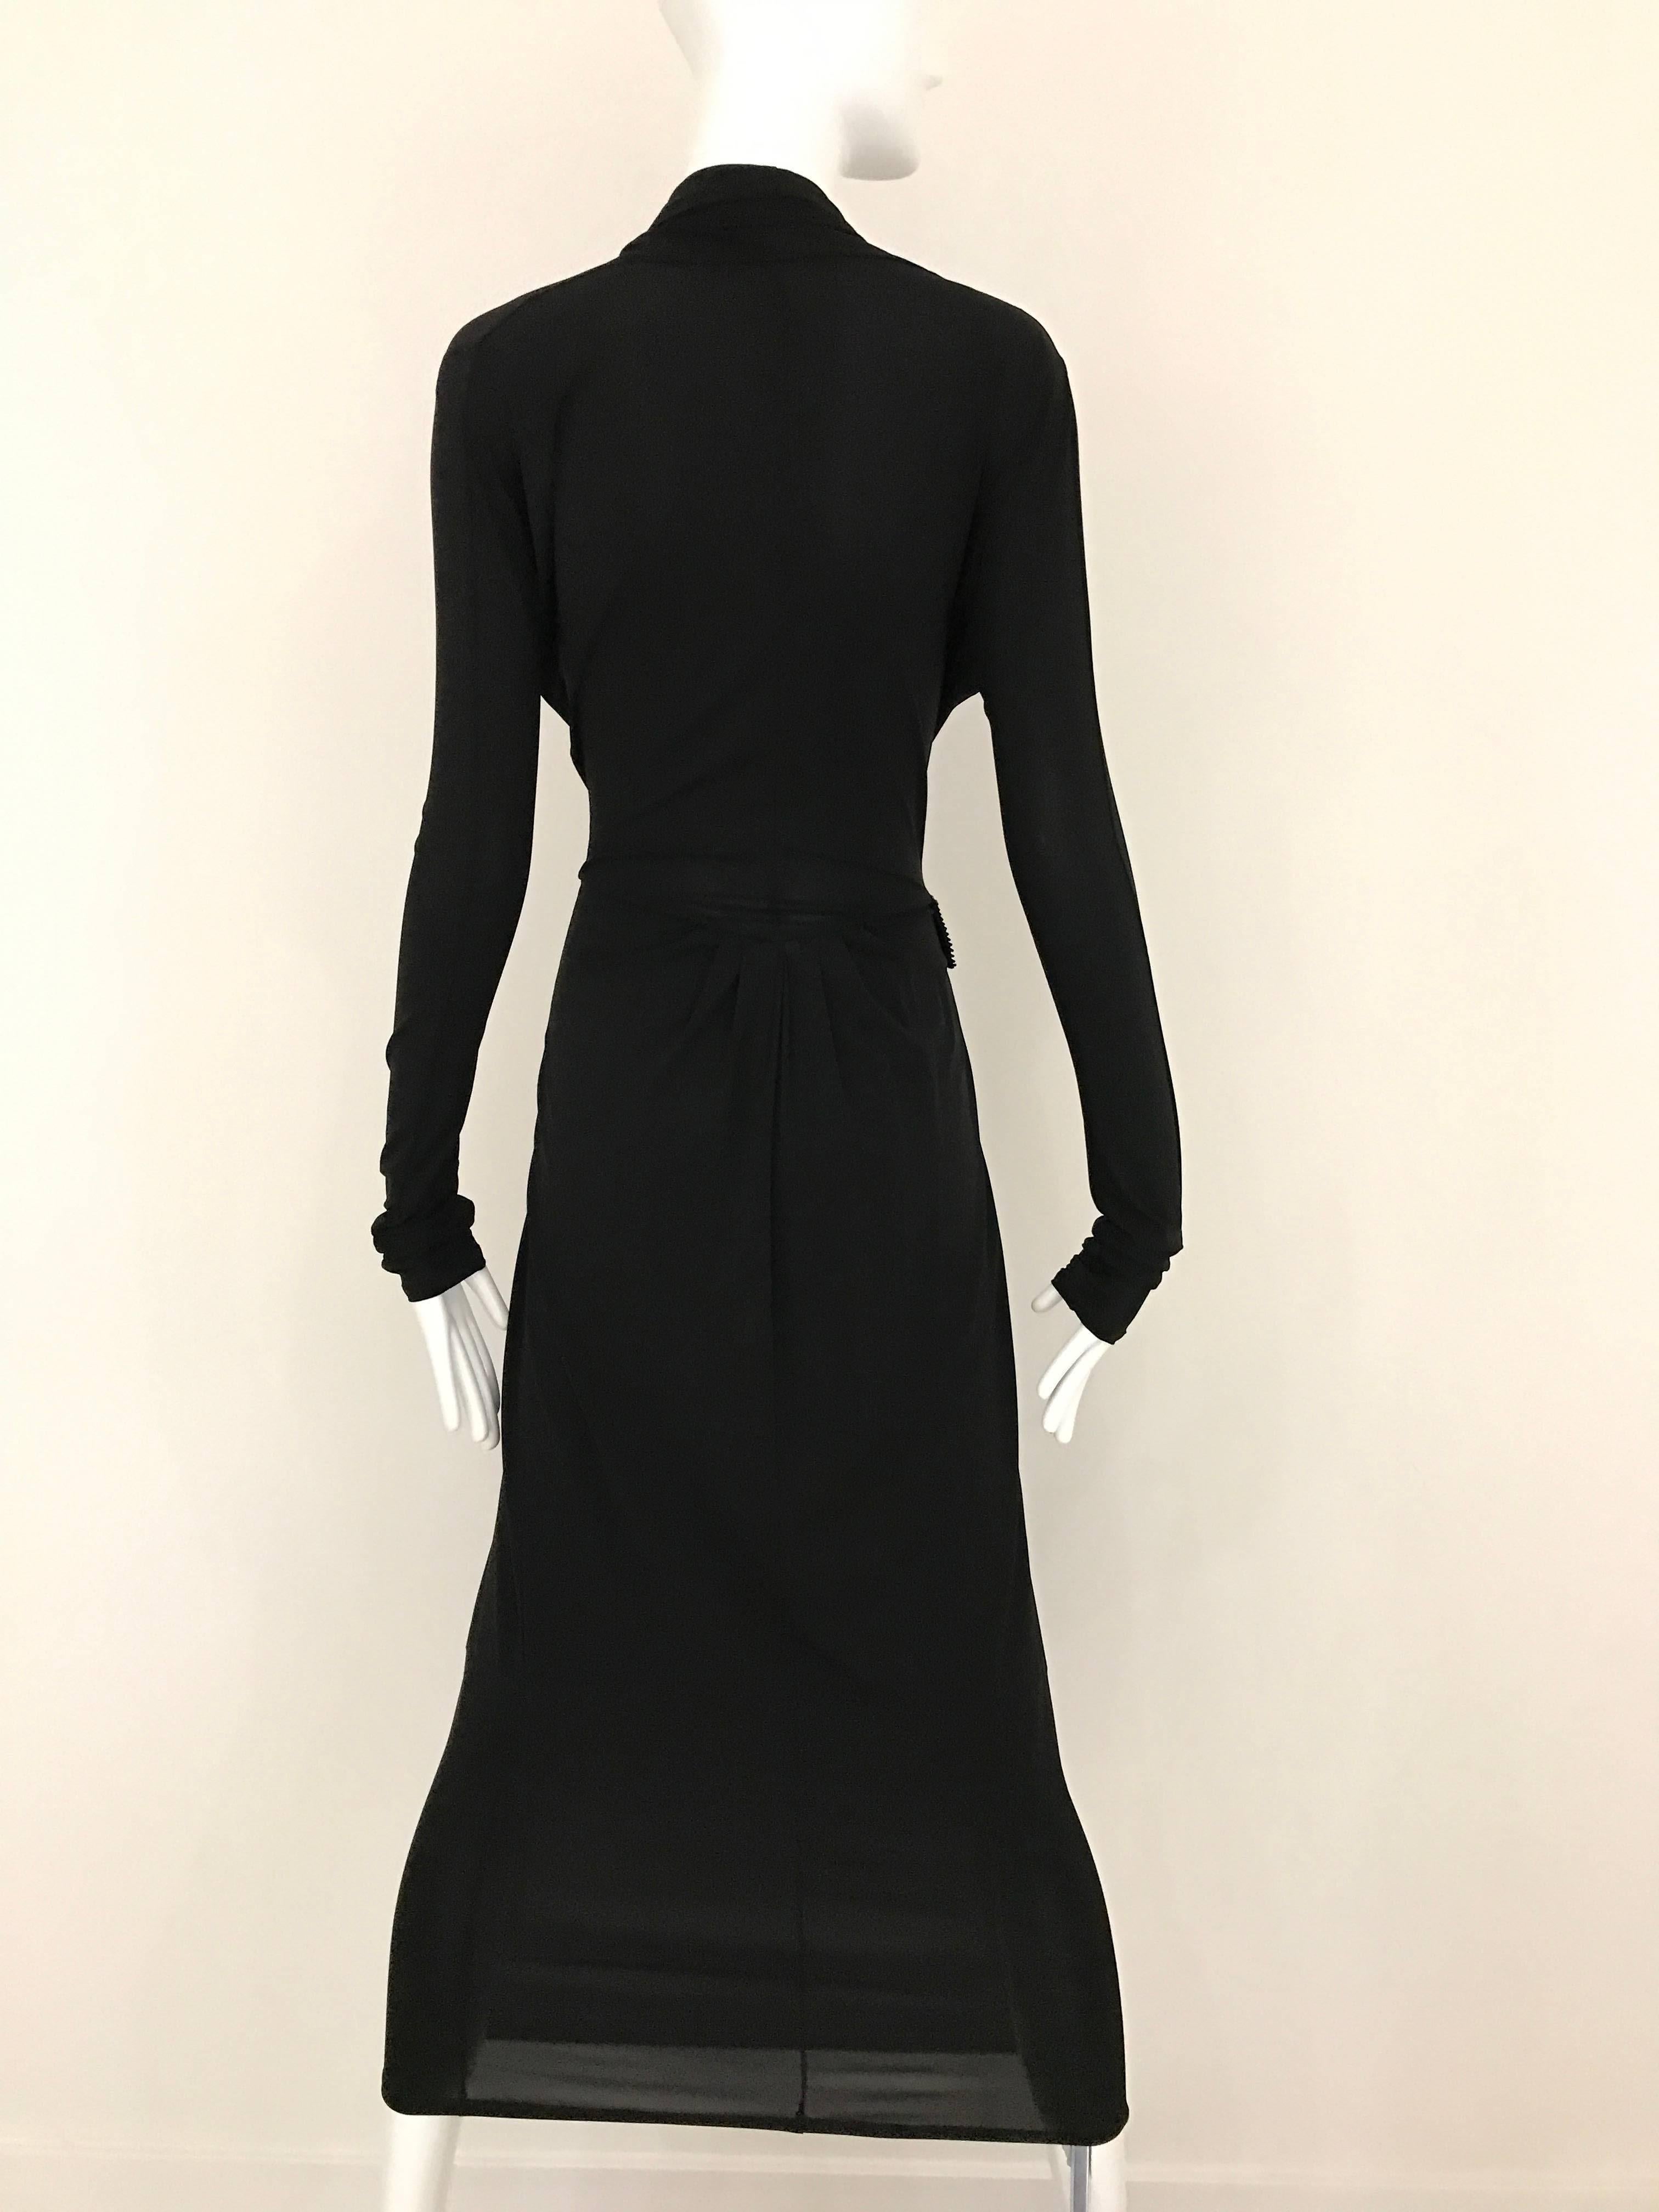 1990s Gianfranco Ferre Black Knit Jersey Cocktail Dress In Excellent Condition For Sale In Beverly Hills, CA